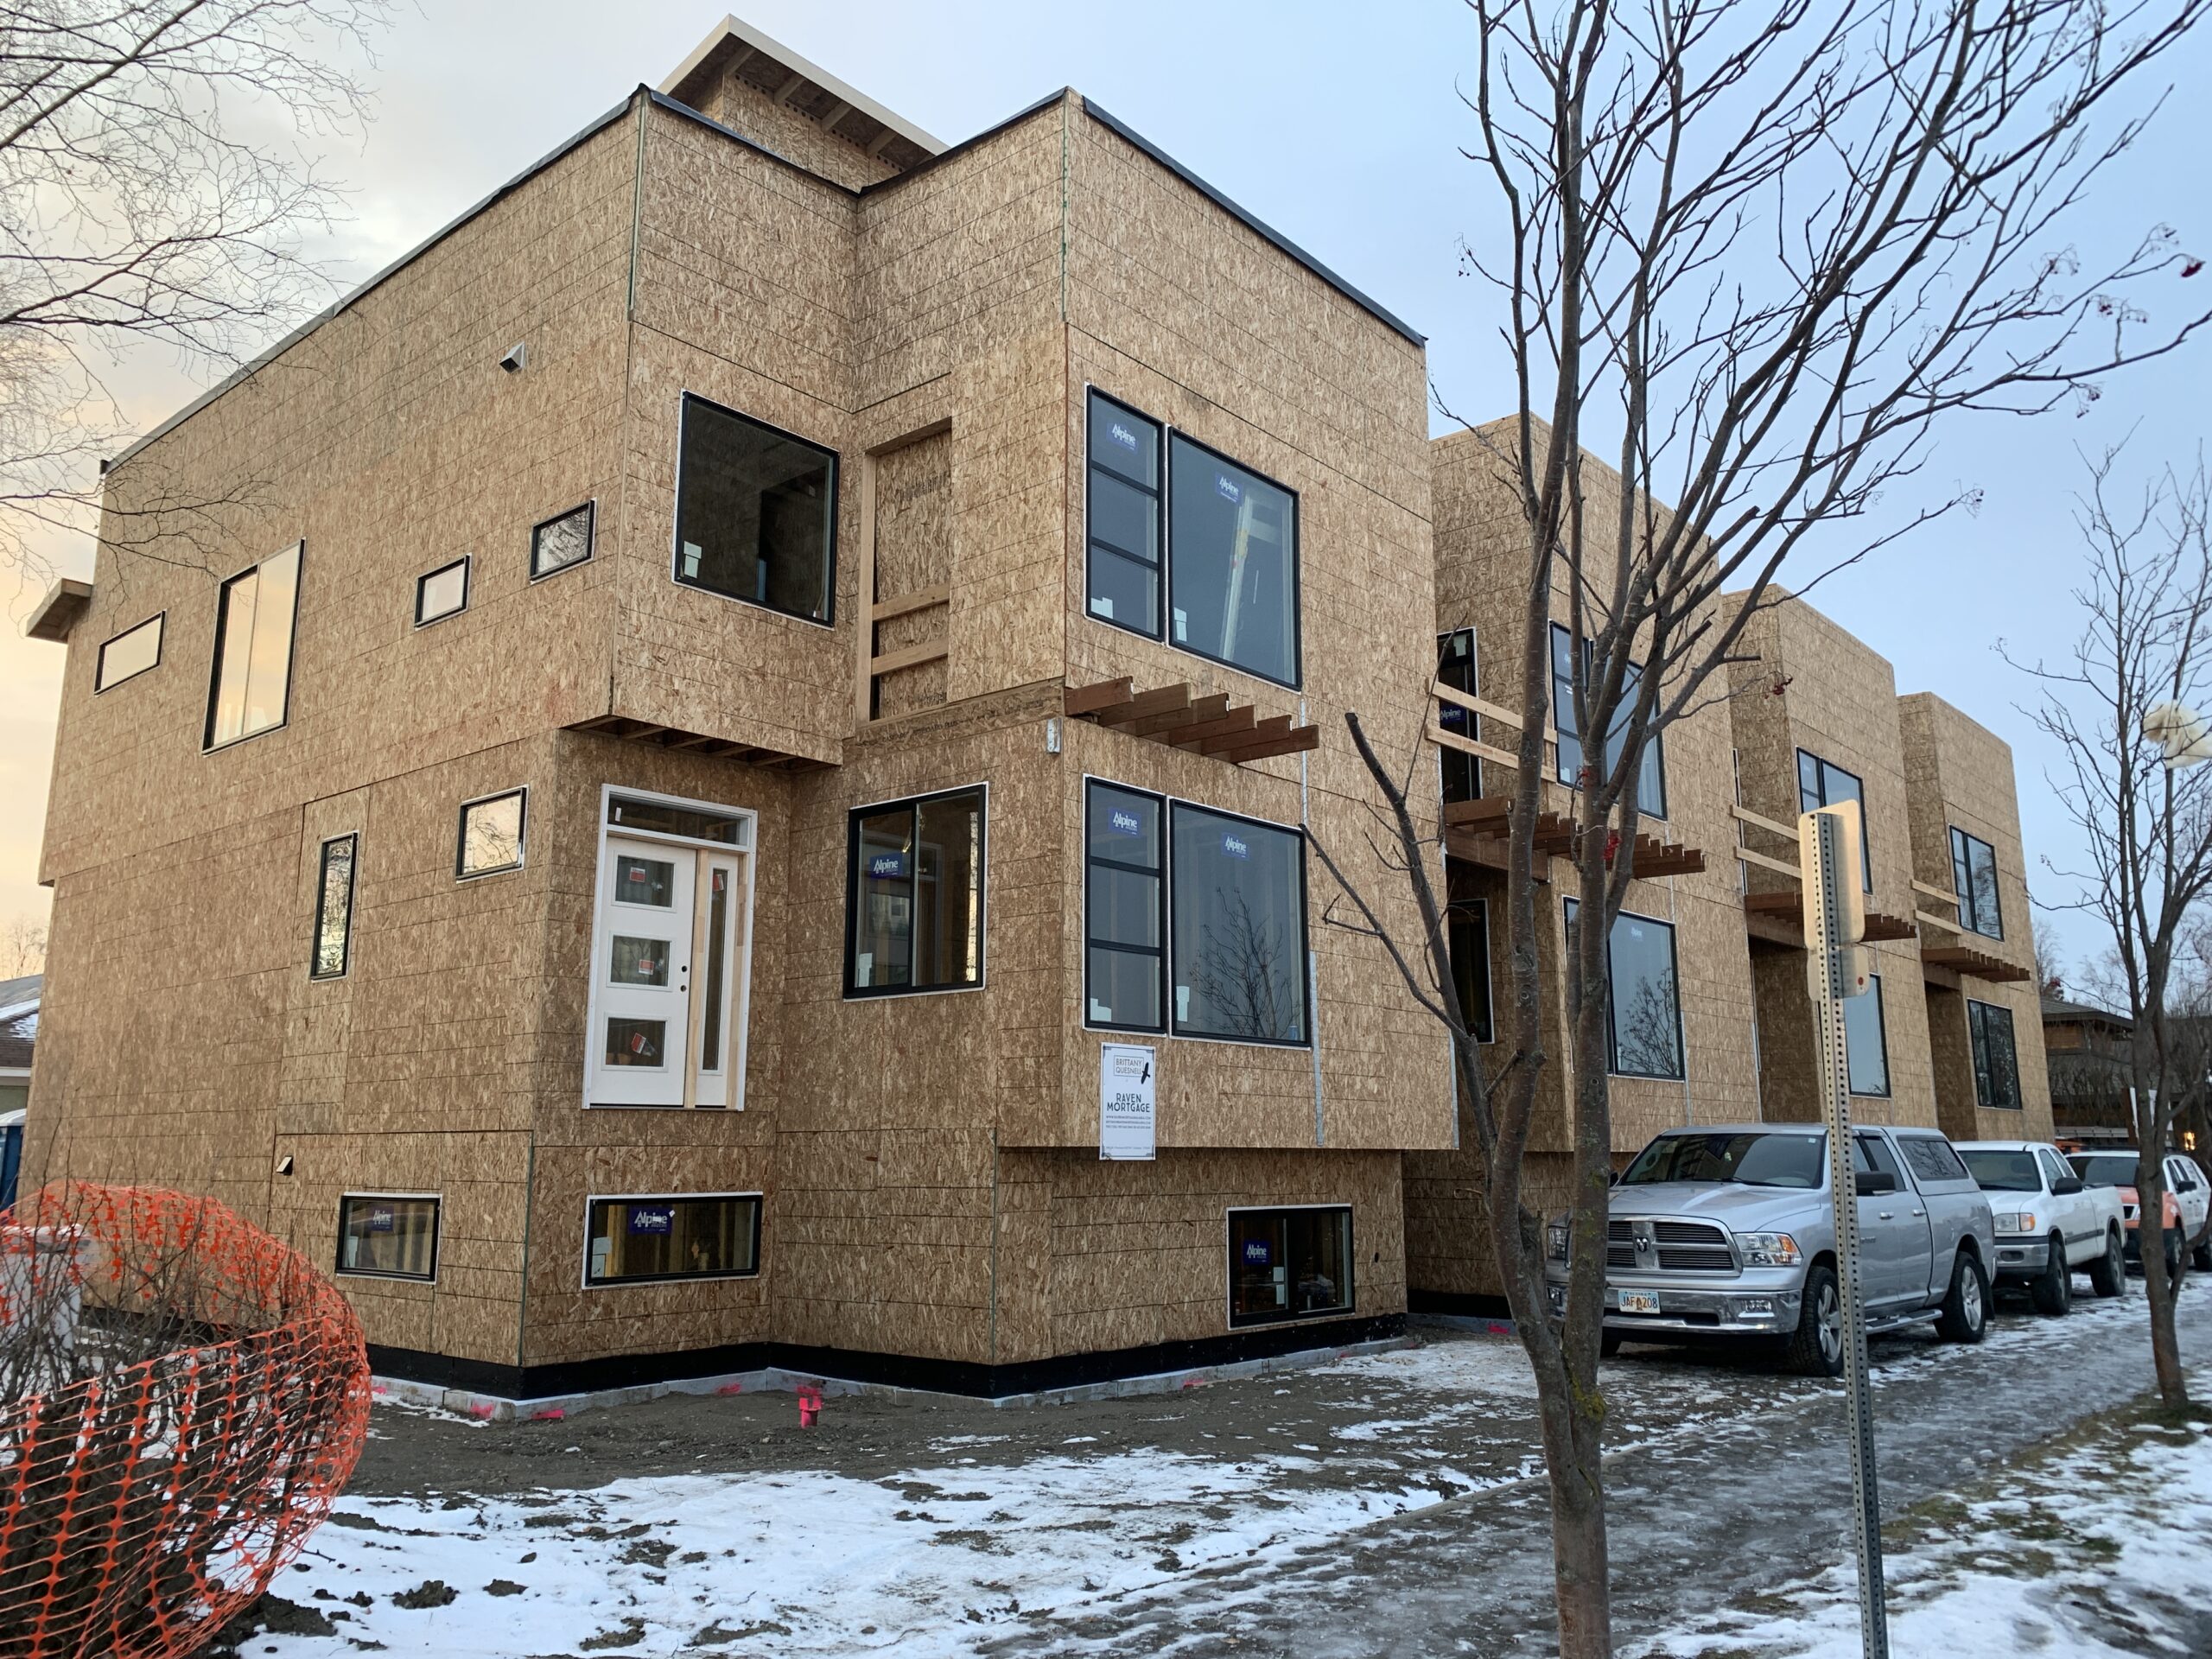 Contemporary townhouses along Delaney Park are nearing completion